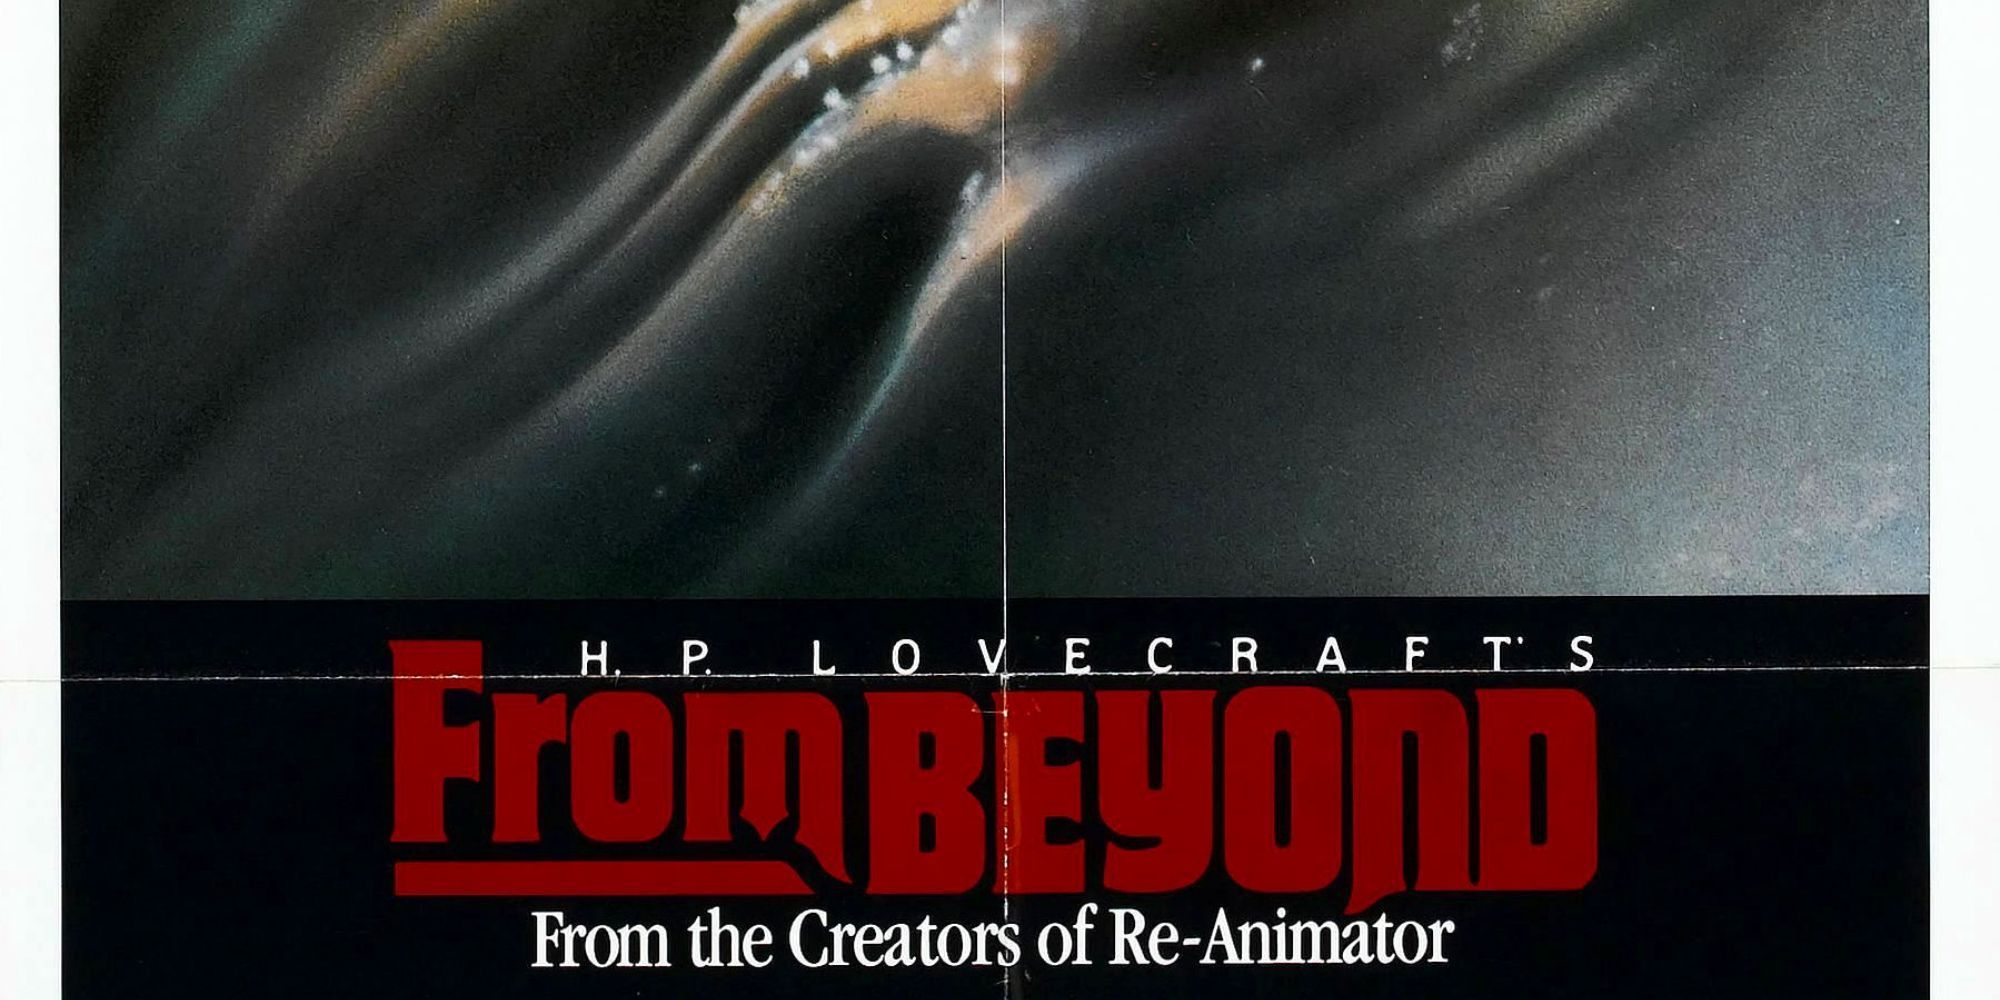 Theatrical poster for From Beyond featuring the film's title